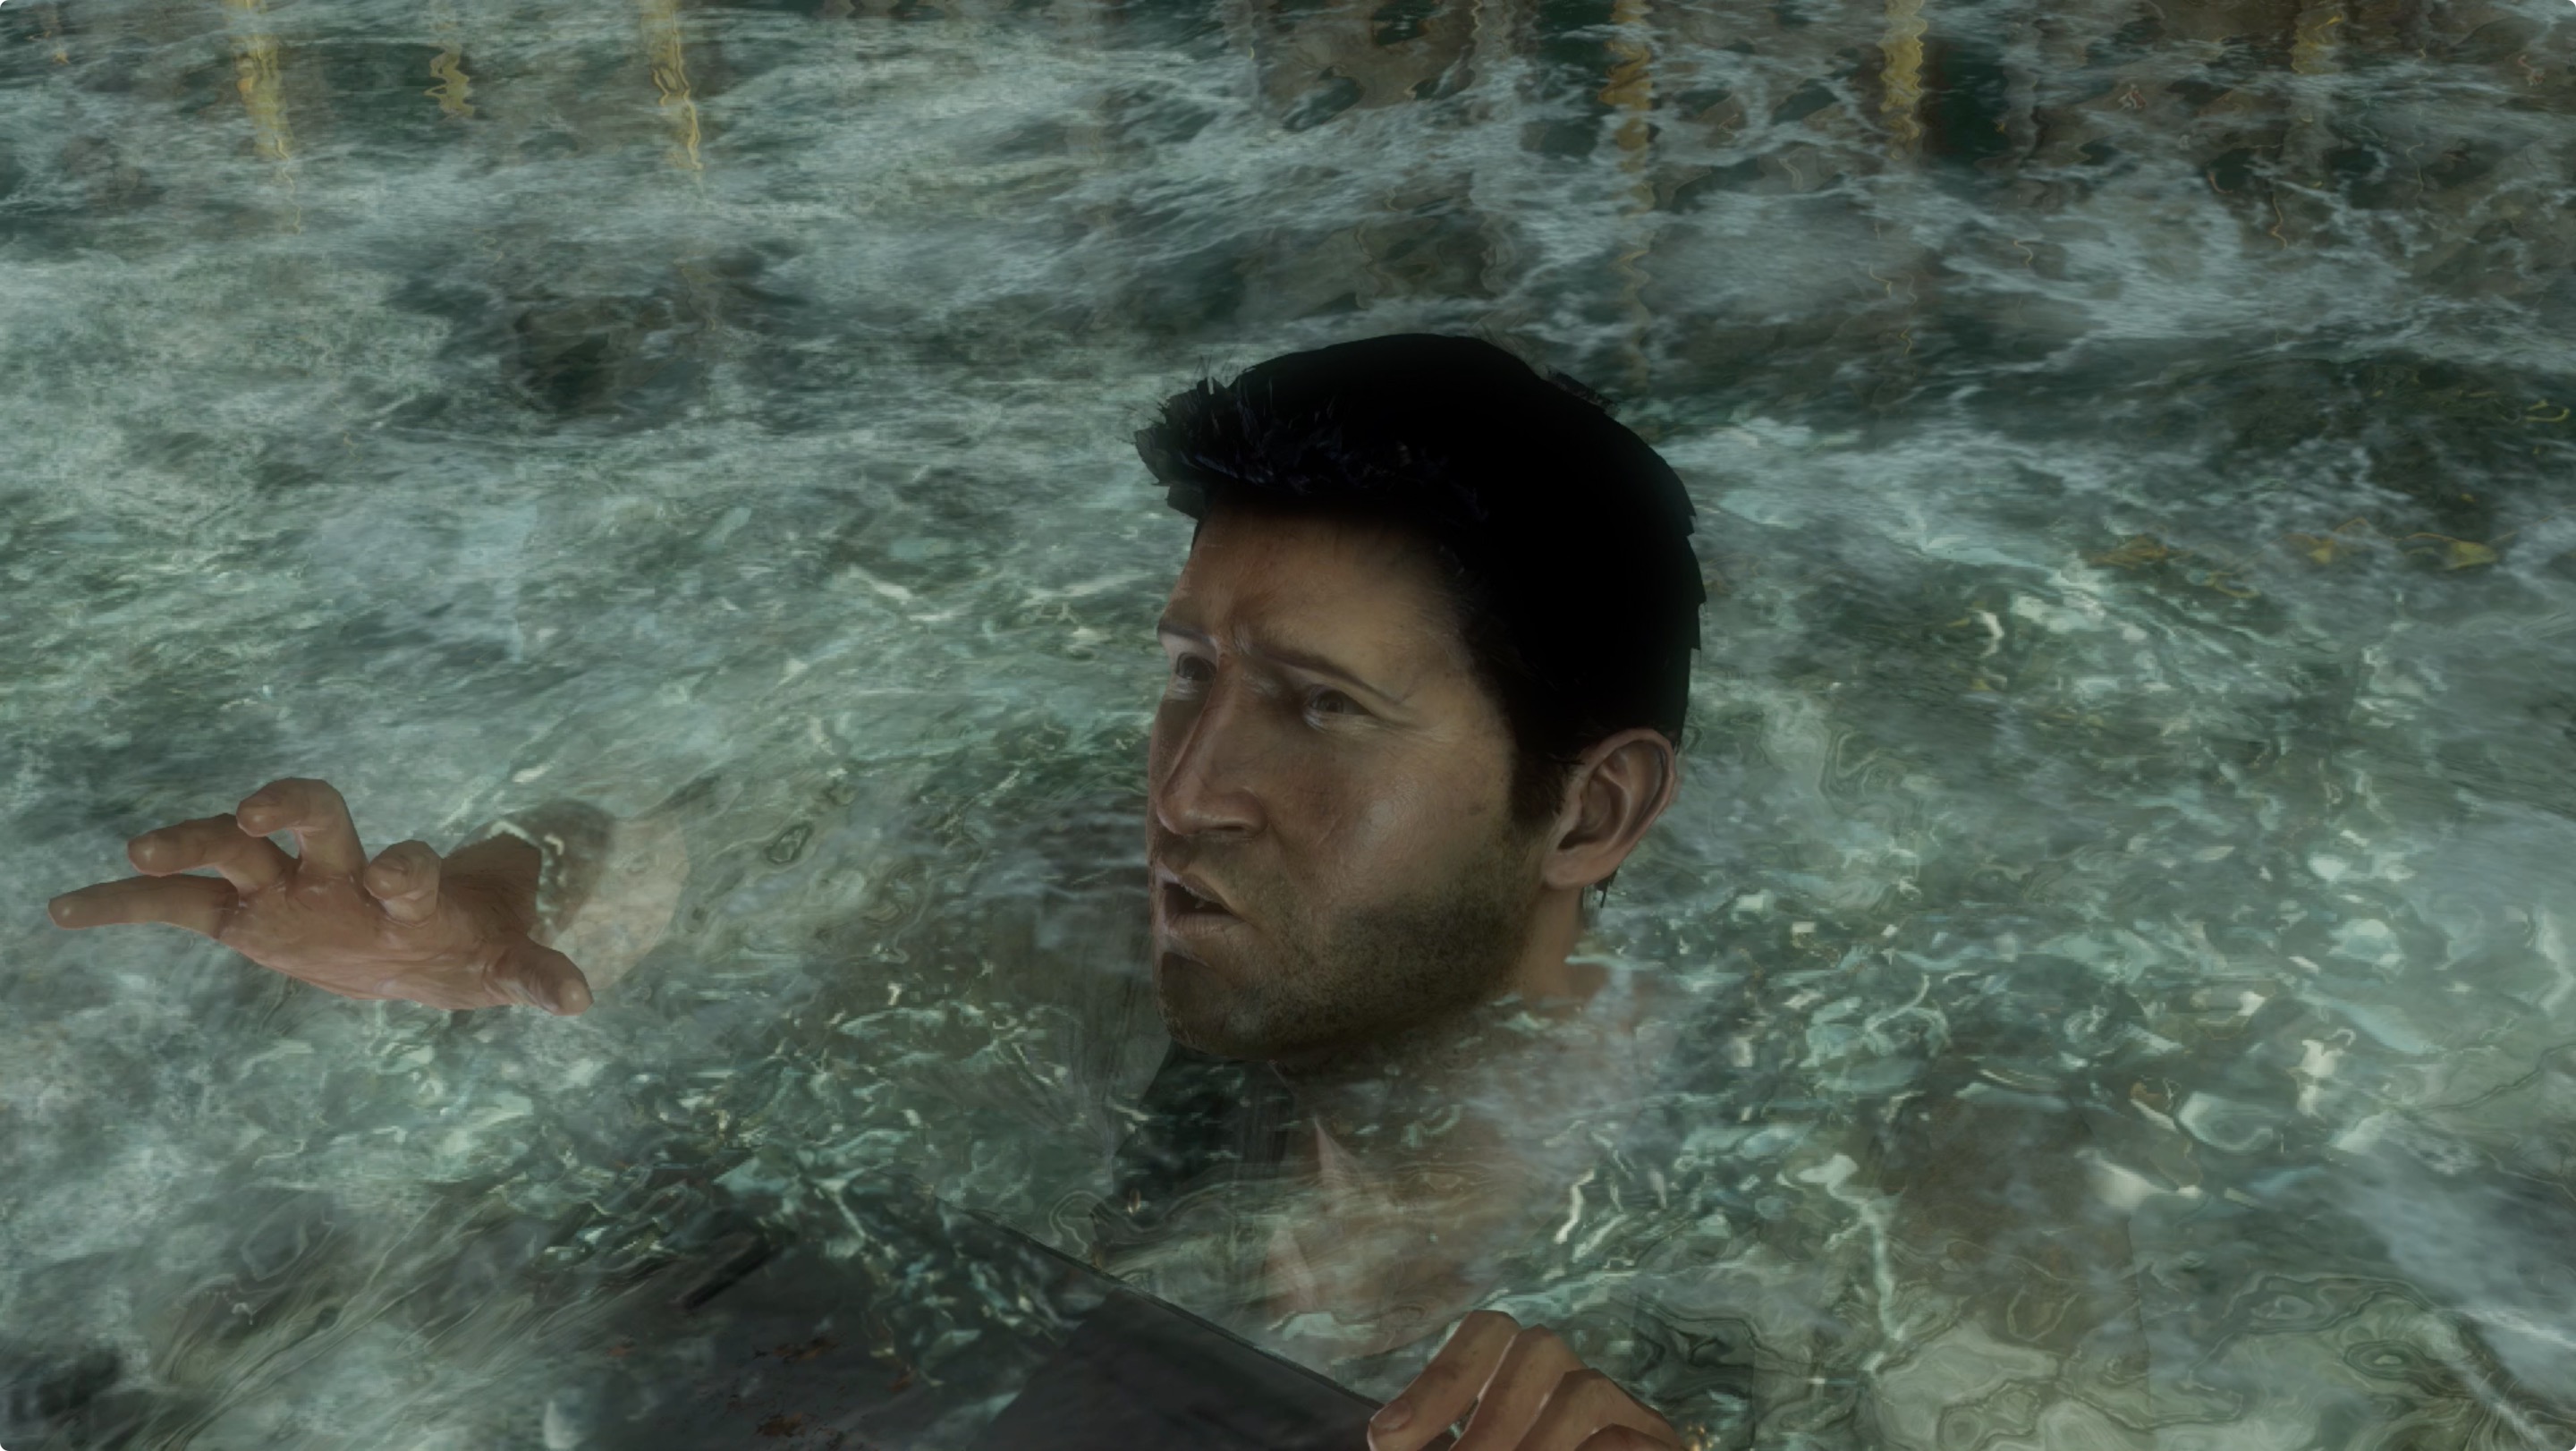 Uncharted 3: Drake’s Deception ‘Sink or Swim’ treasure locations guide